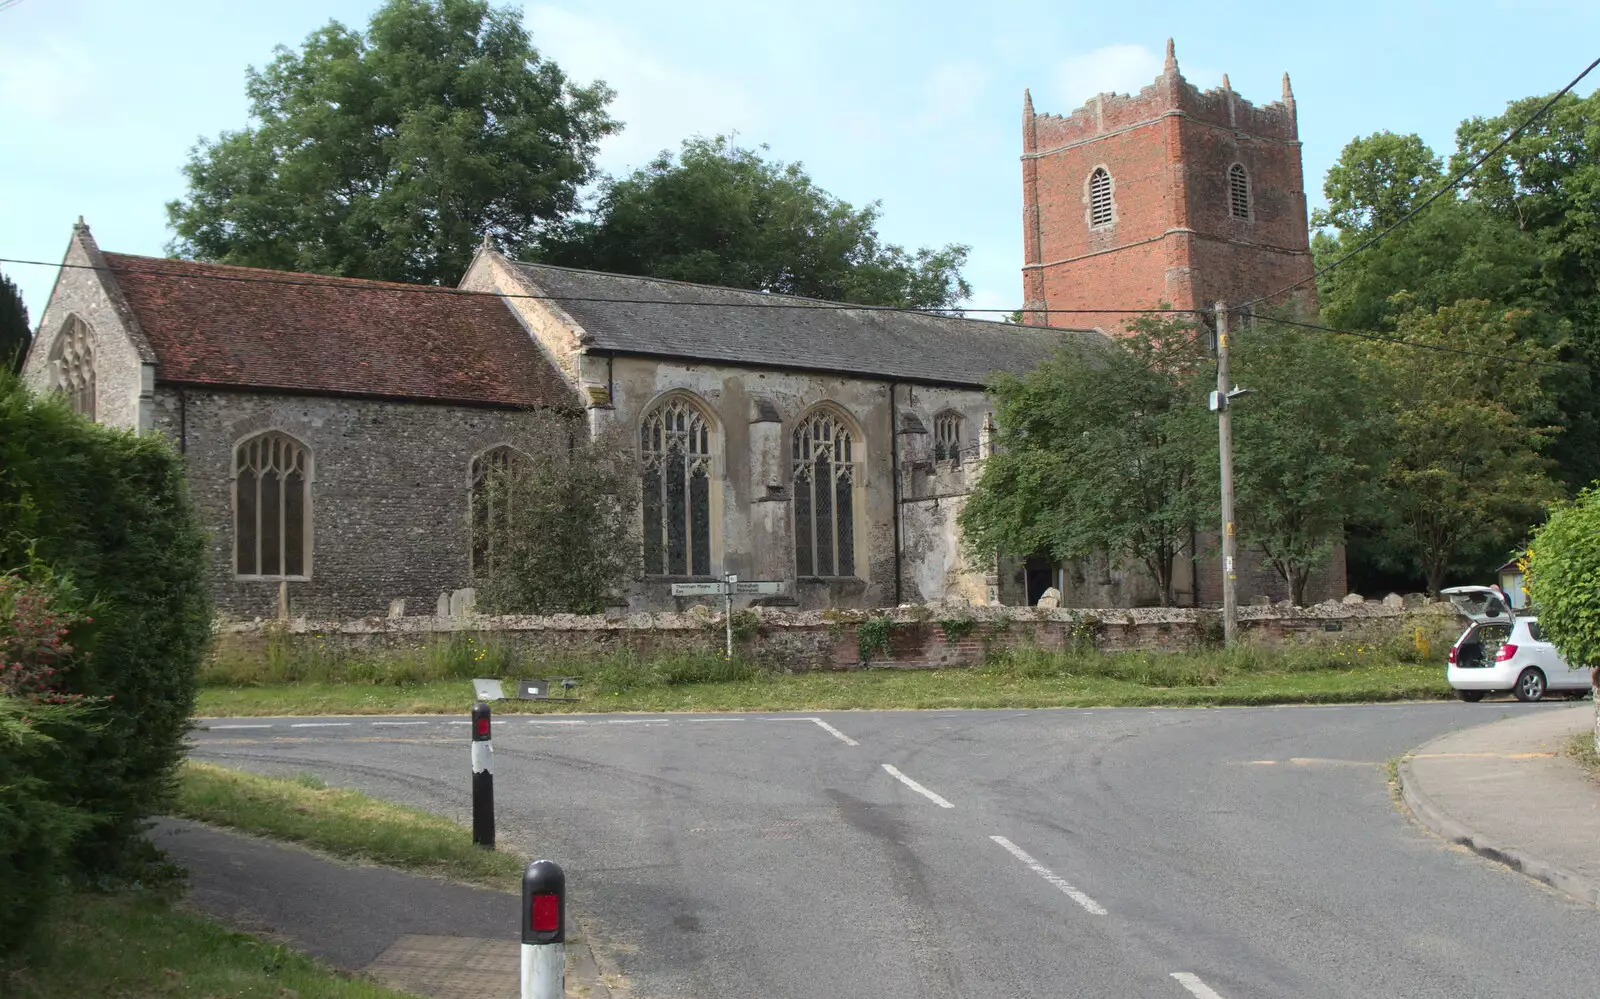 St. Mary the Virgin at Gislingham, from A BSCC Ride to Pulham Market, Norfolk - 17th June 2021